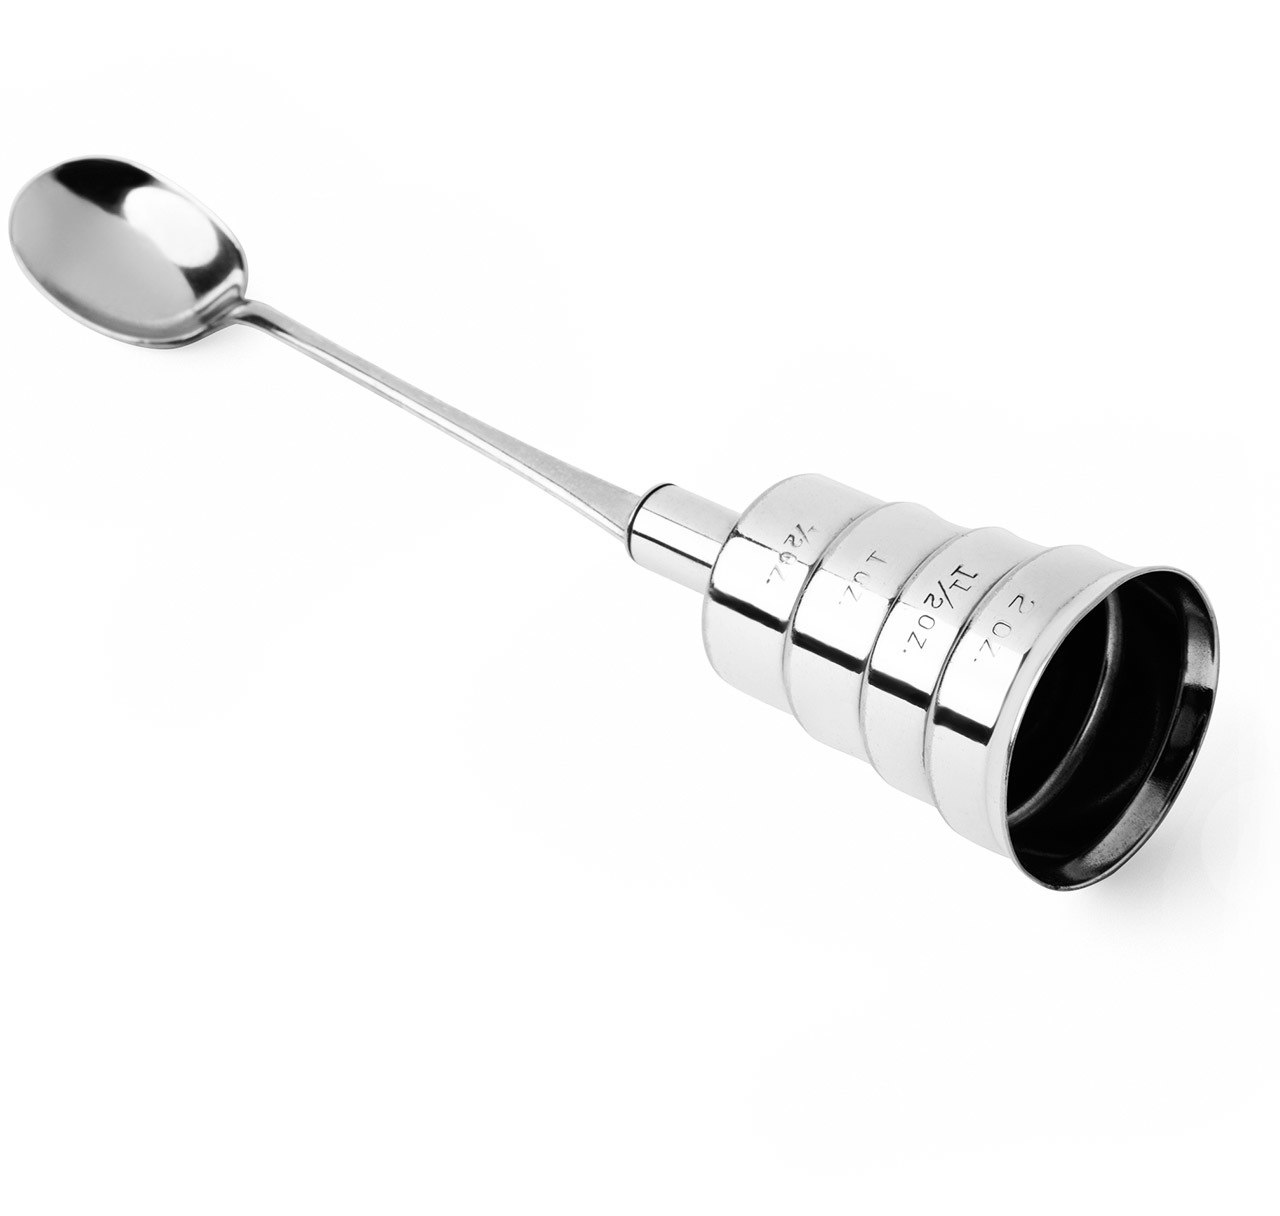 Napier Silver-Plated Valve Jigger Cocktail Spoon